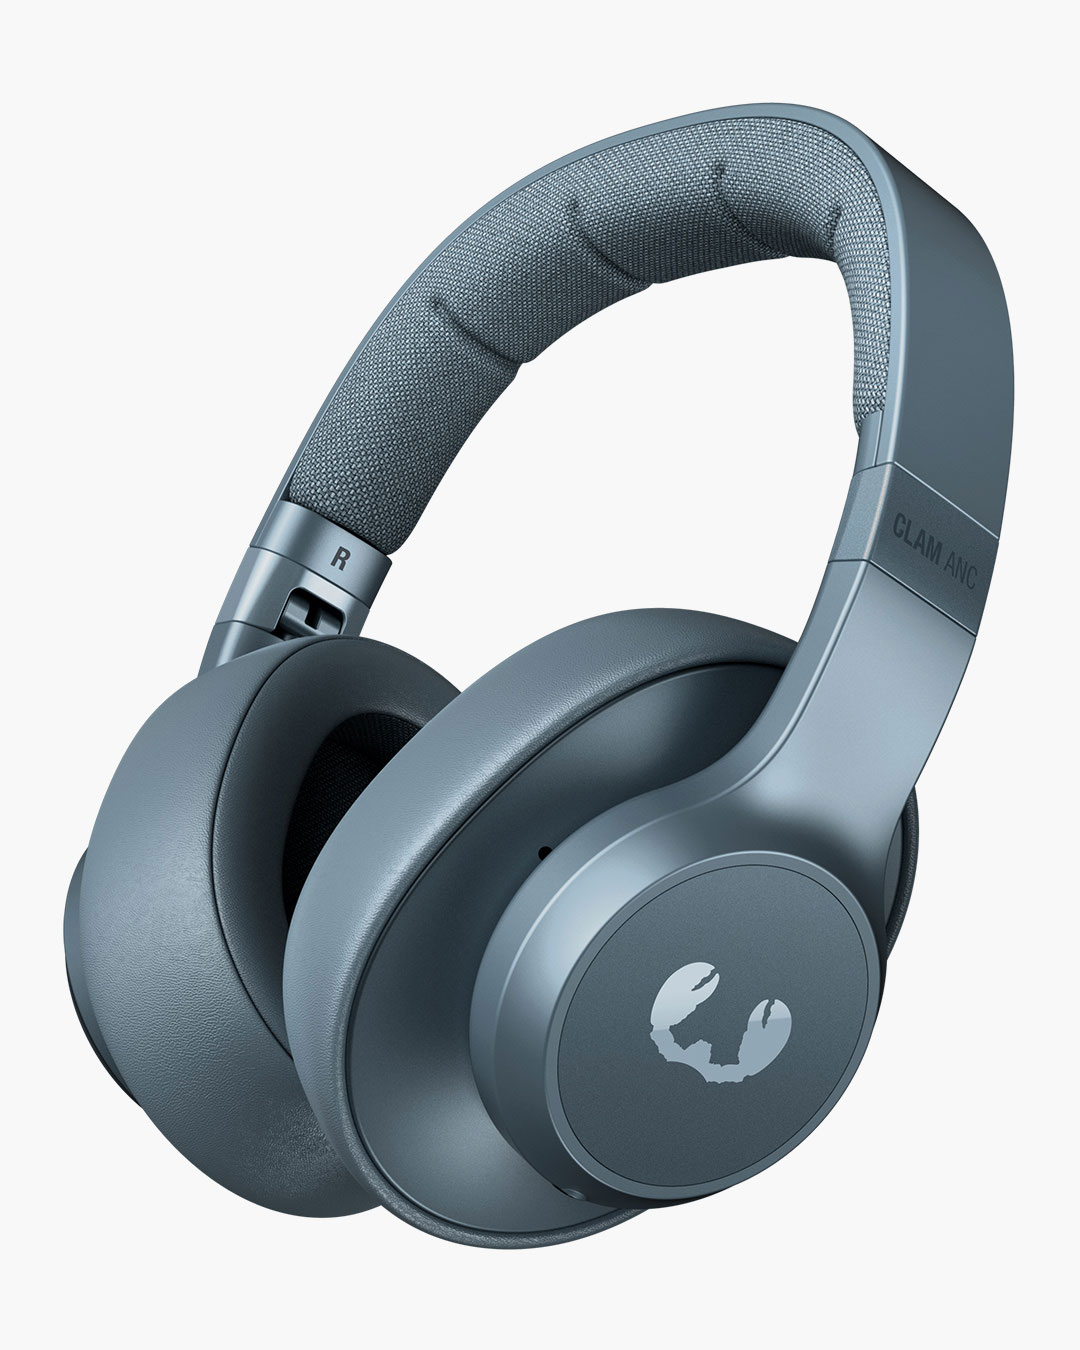 Fresh 'n Rebel - Clam ANC - Wireless over-ear headphones with active noise cancelling - Dive Blue